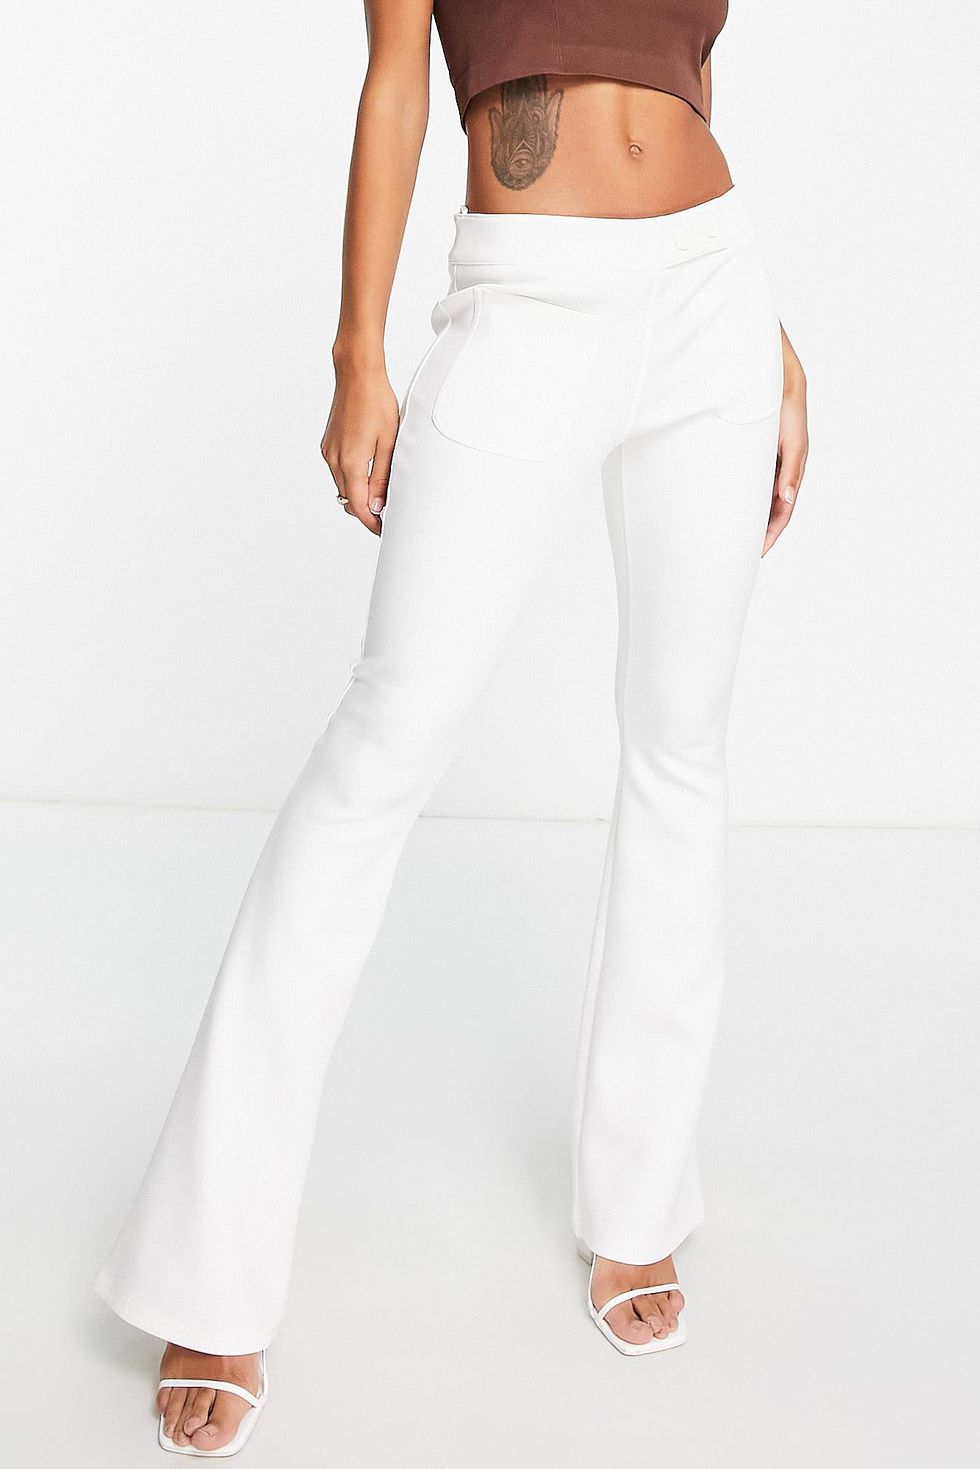 Spanx's New White Pants Are Wide-Leg and Totally Opaque